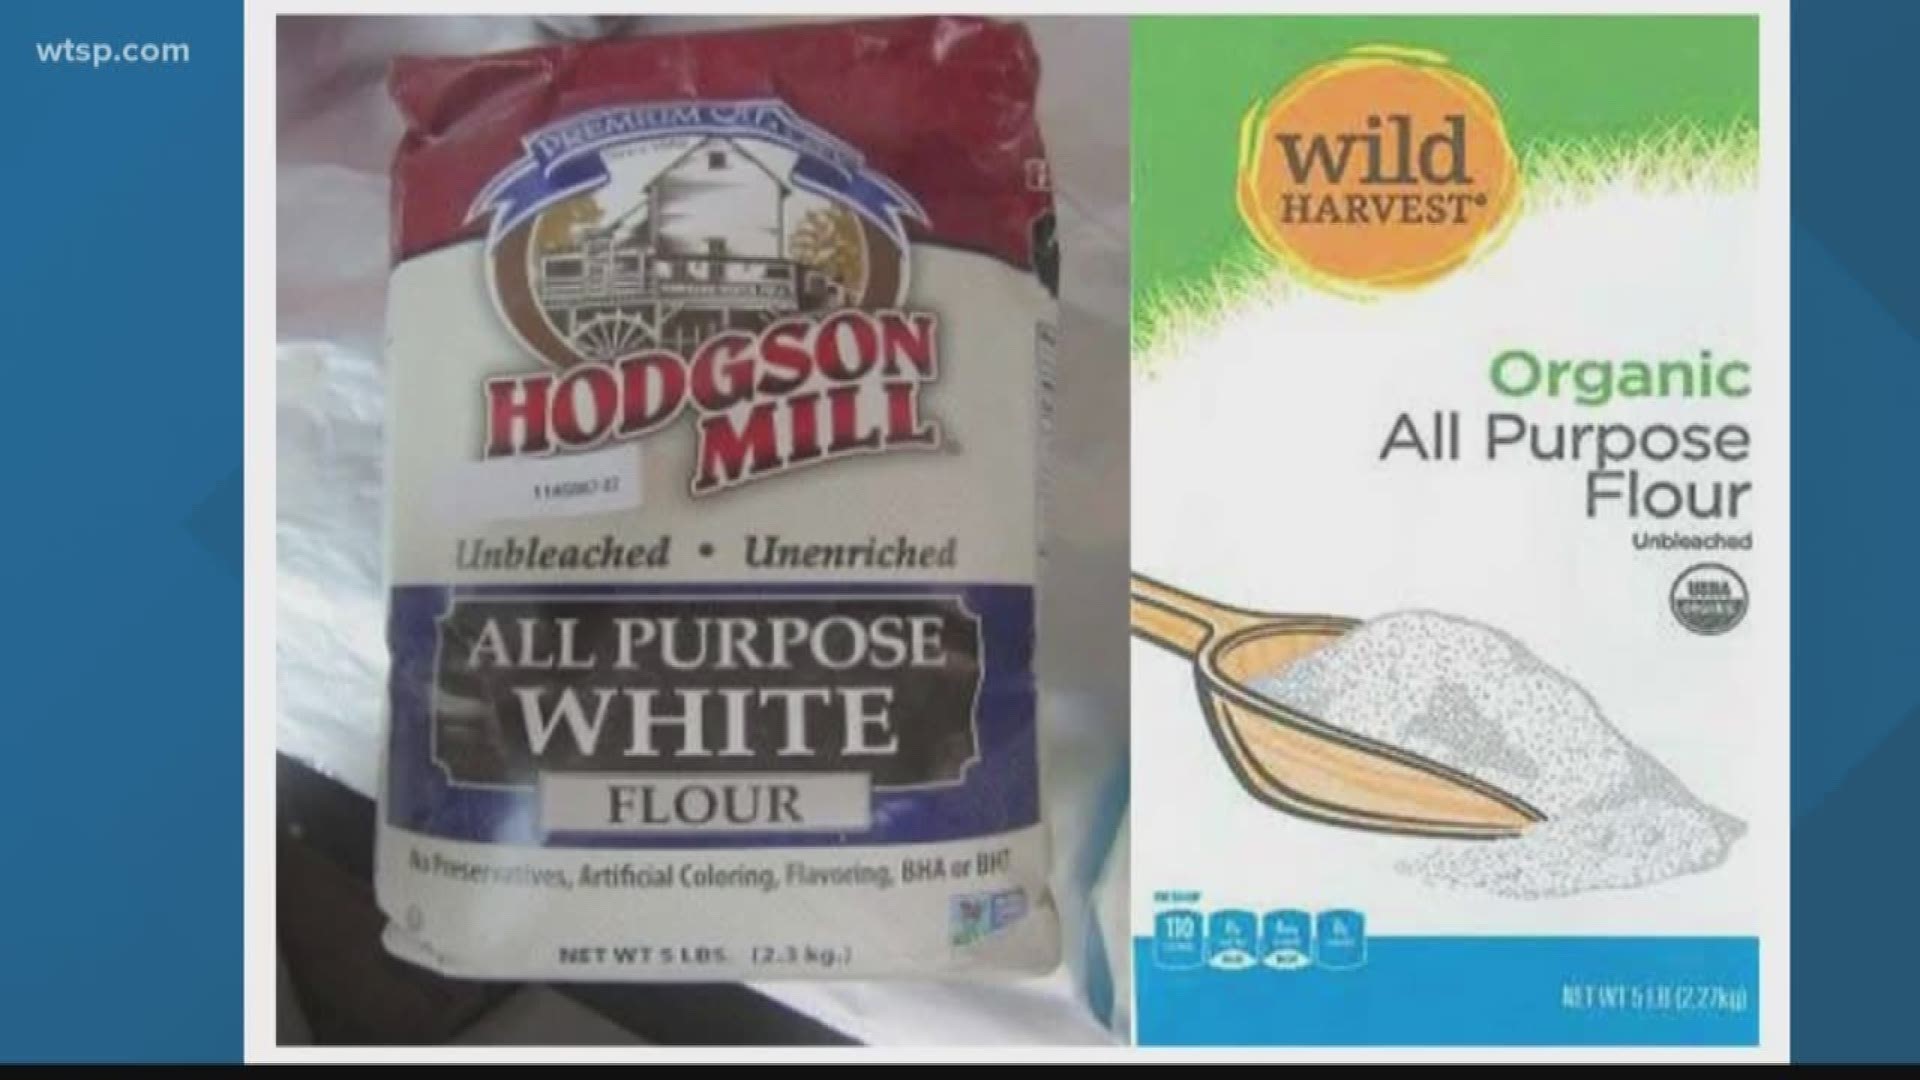 Hodgson Mill and UNFI brand products are being recalled